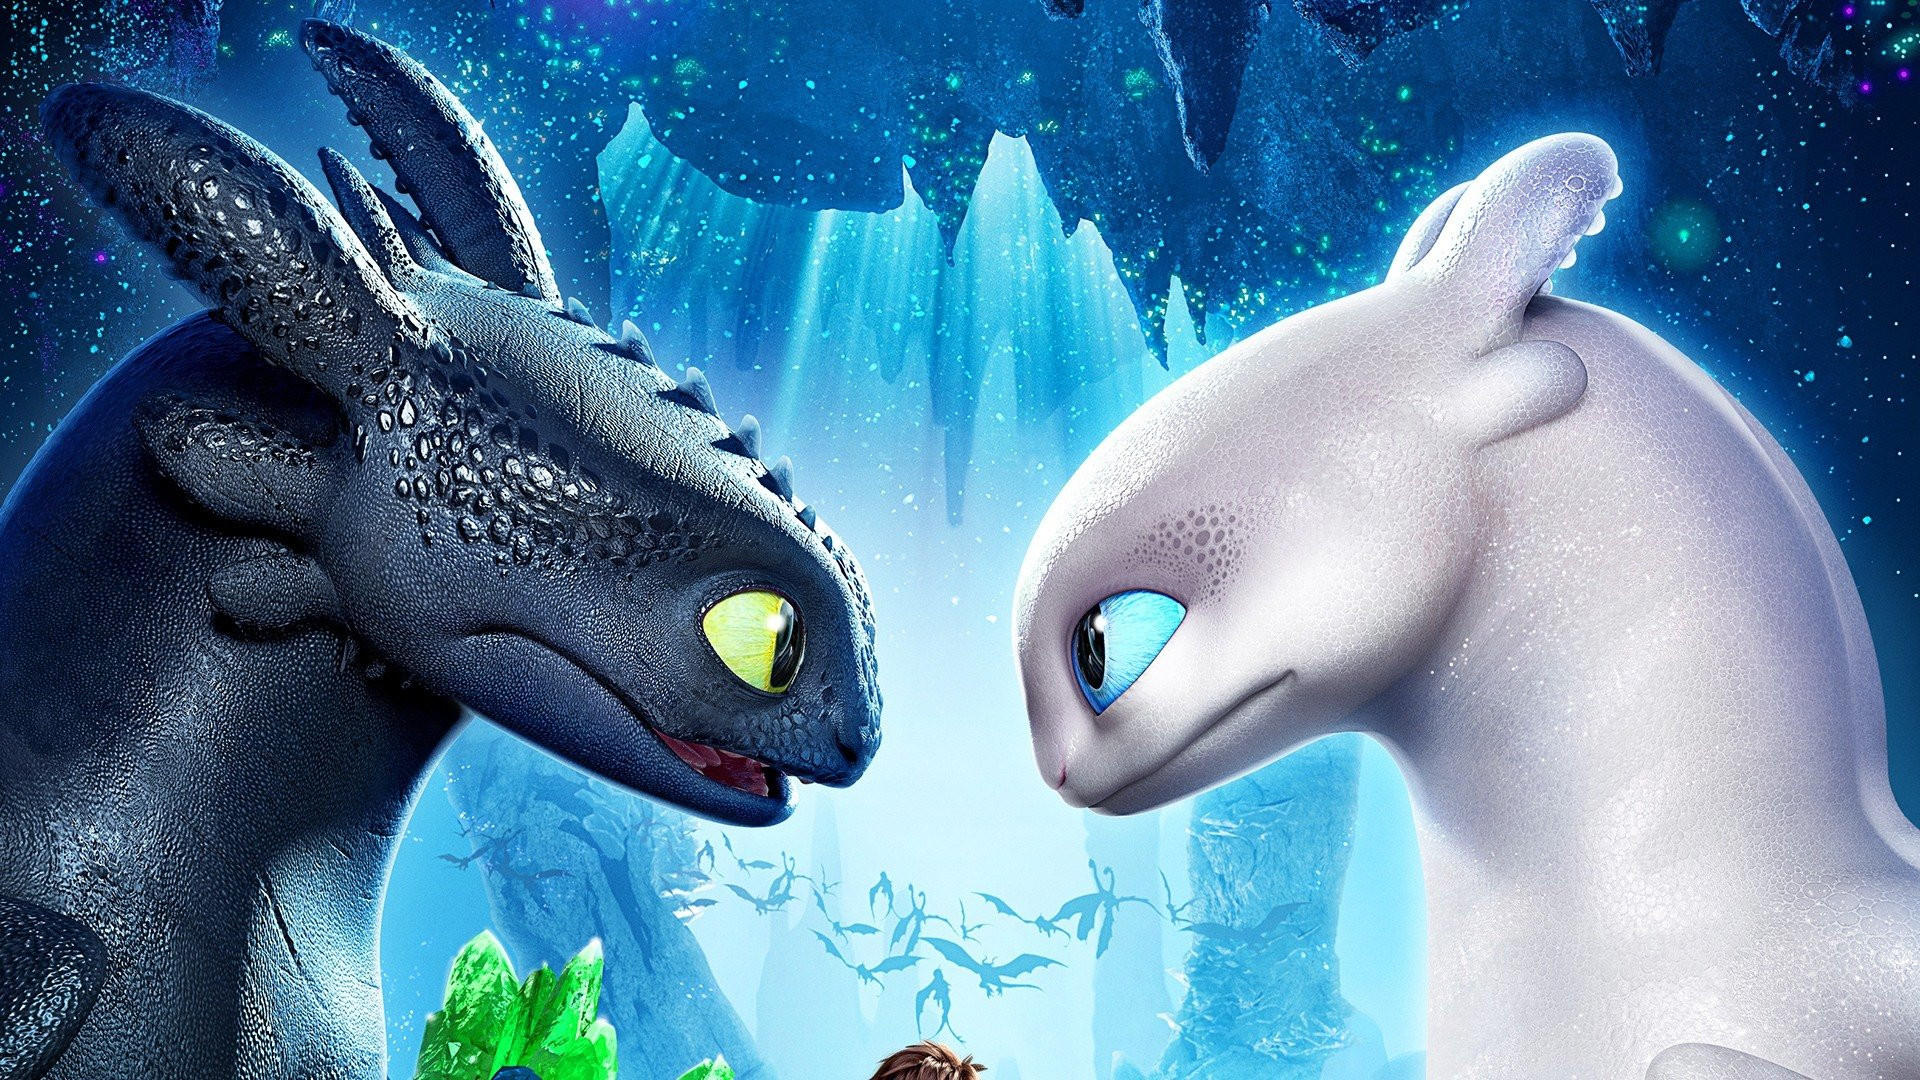 How To Train Your Dragon Wallpaper Full HD 39440